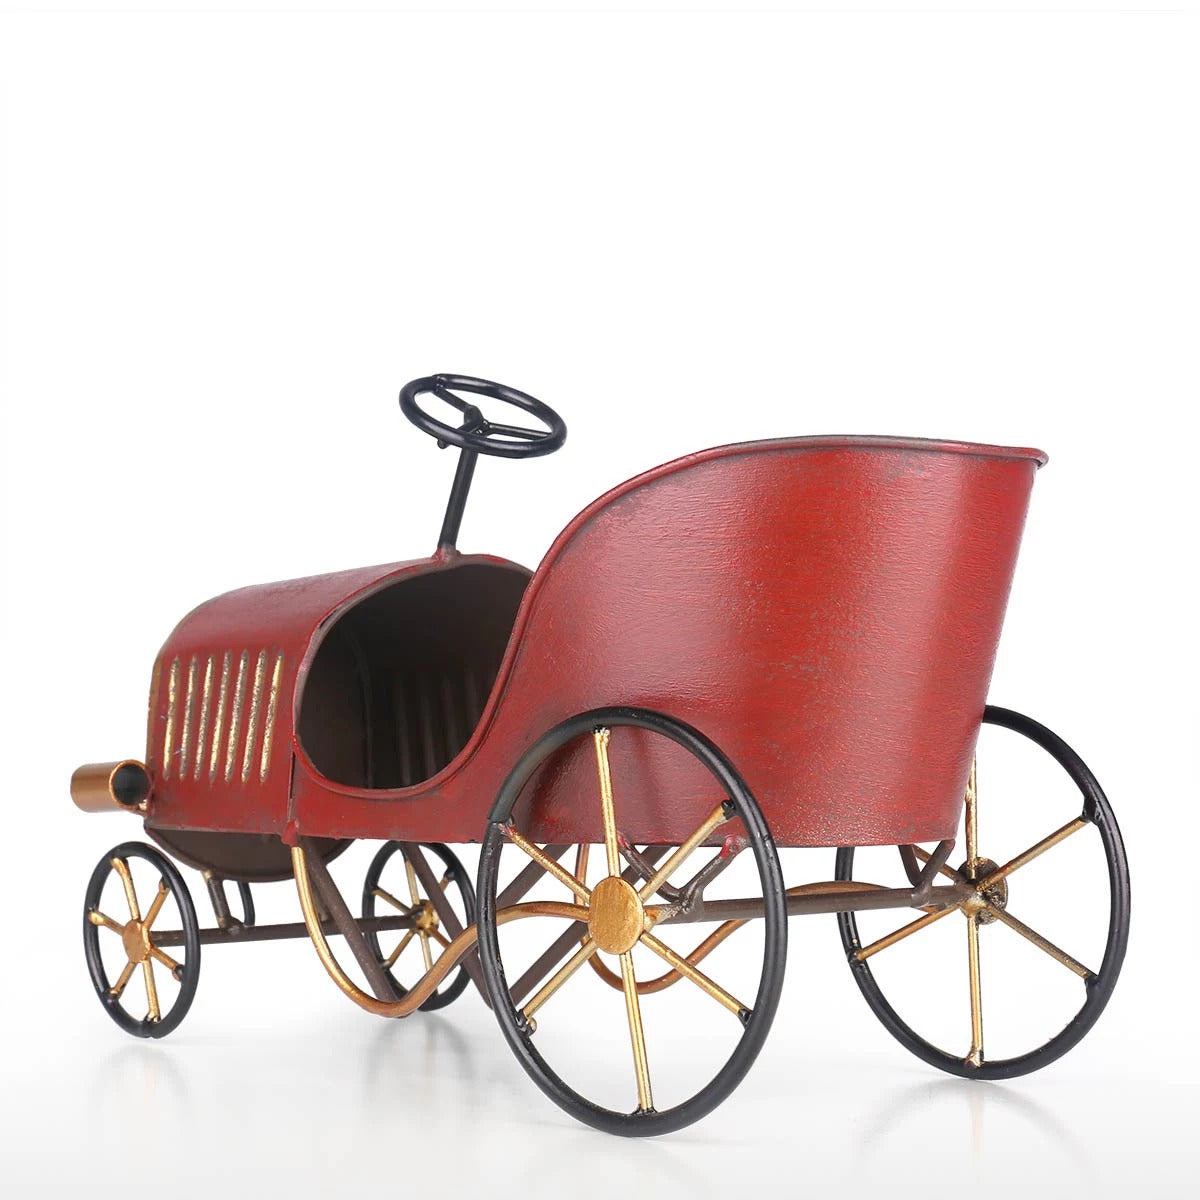 Pheaton Carriage and Romantic Buggy